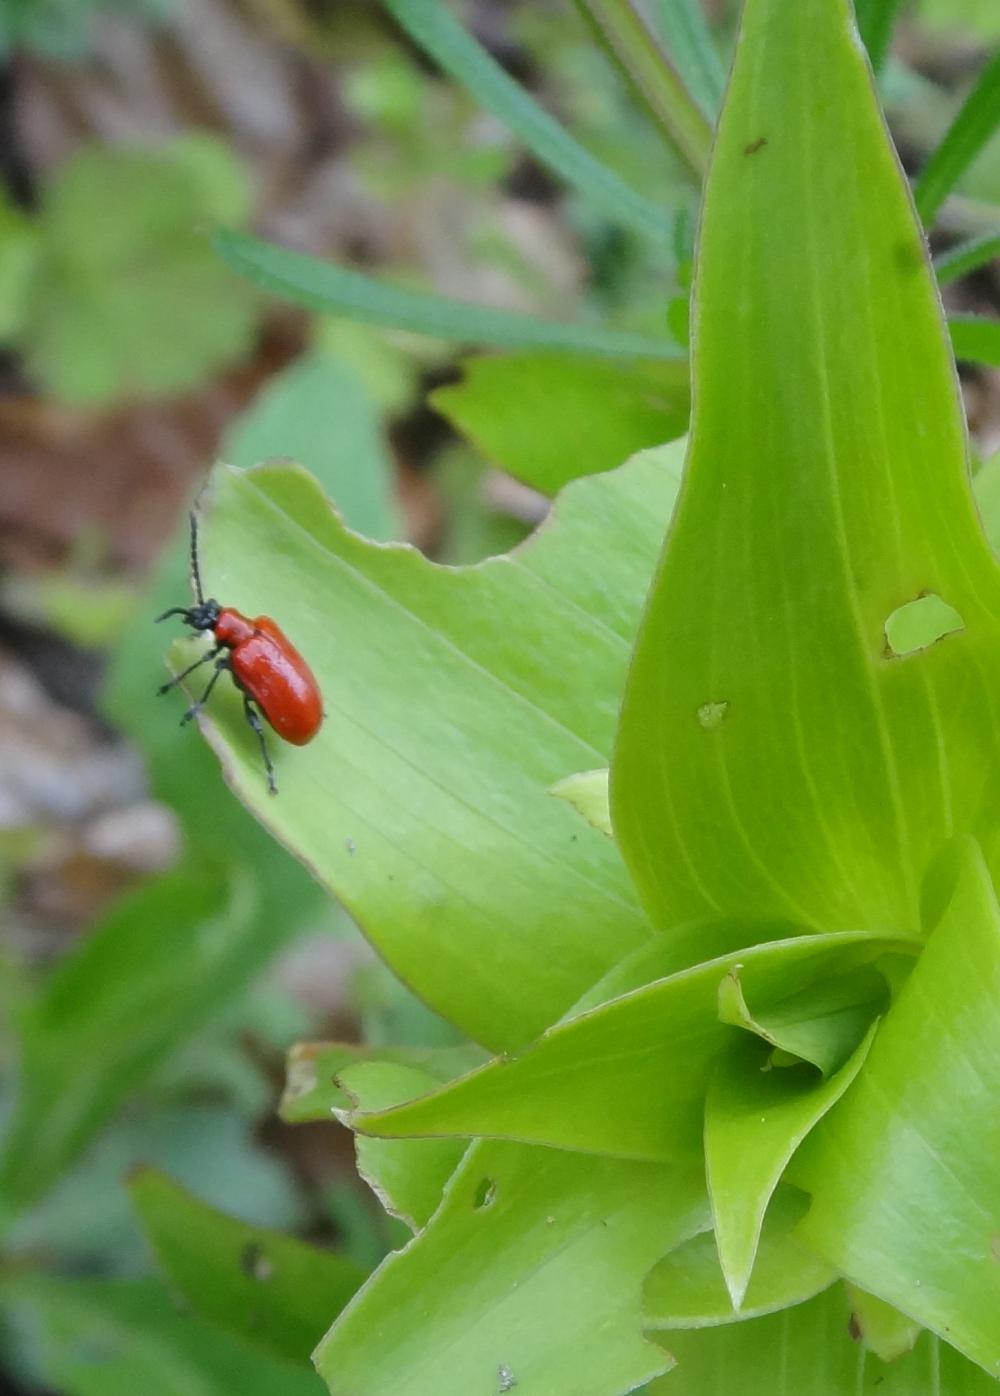 keep looking for lily beetles